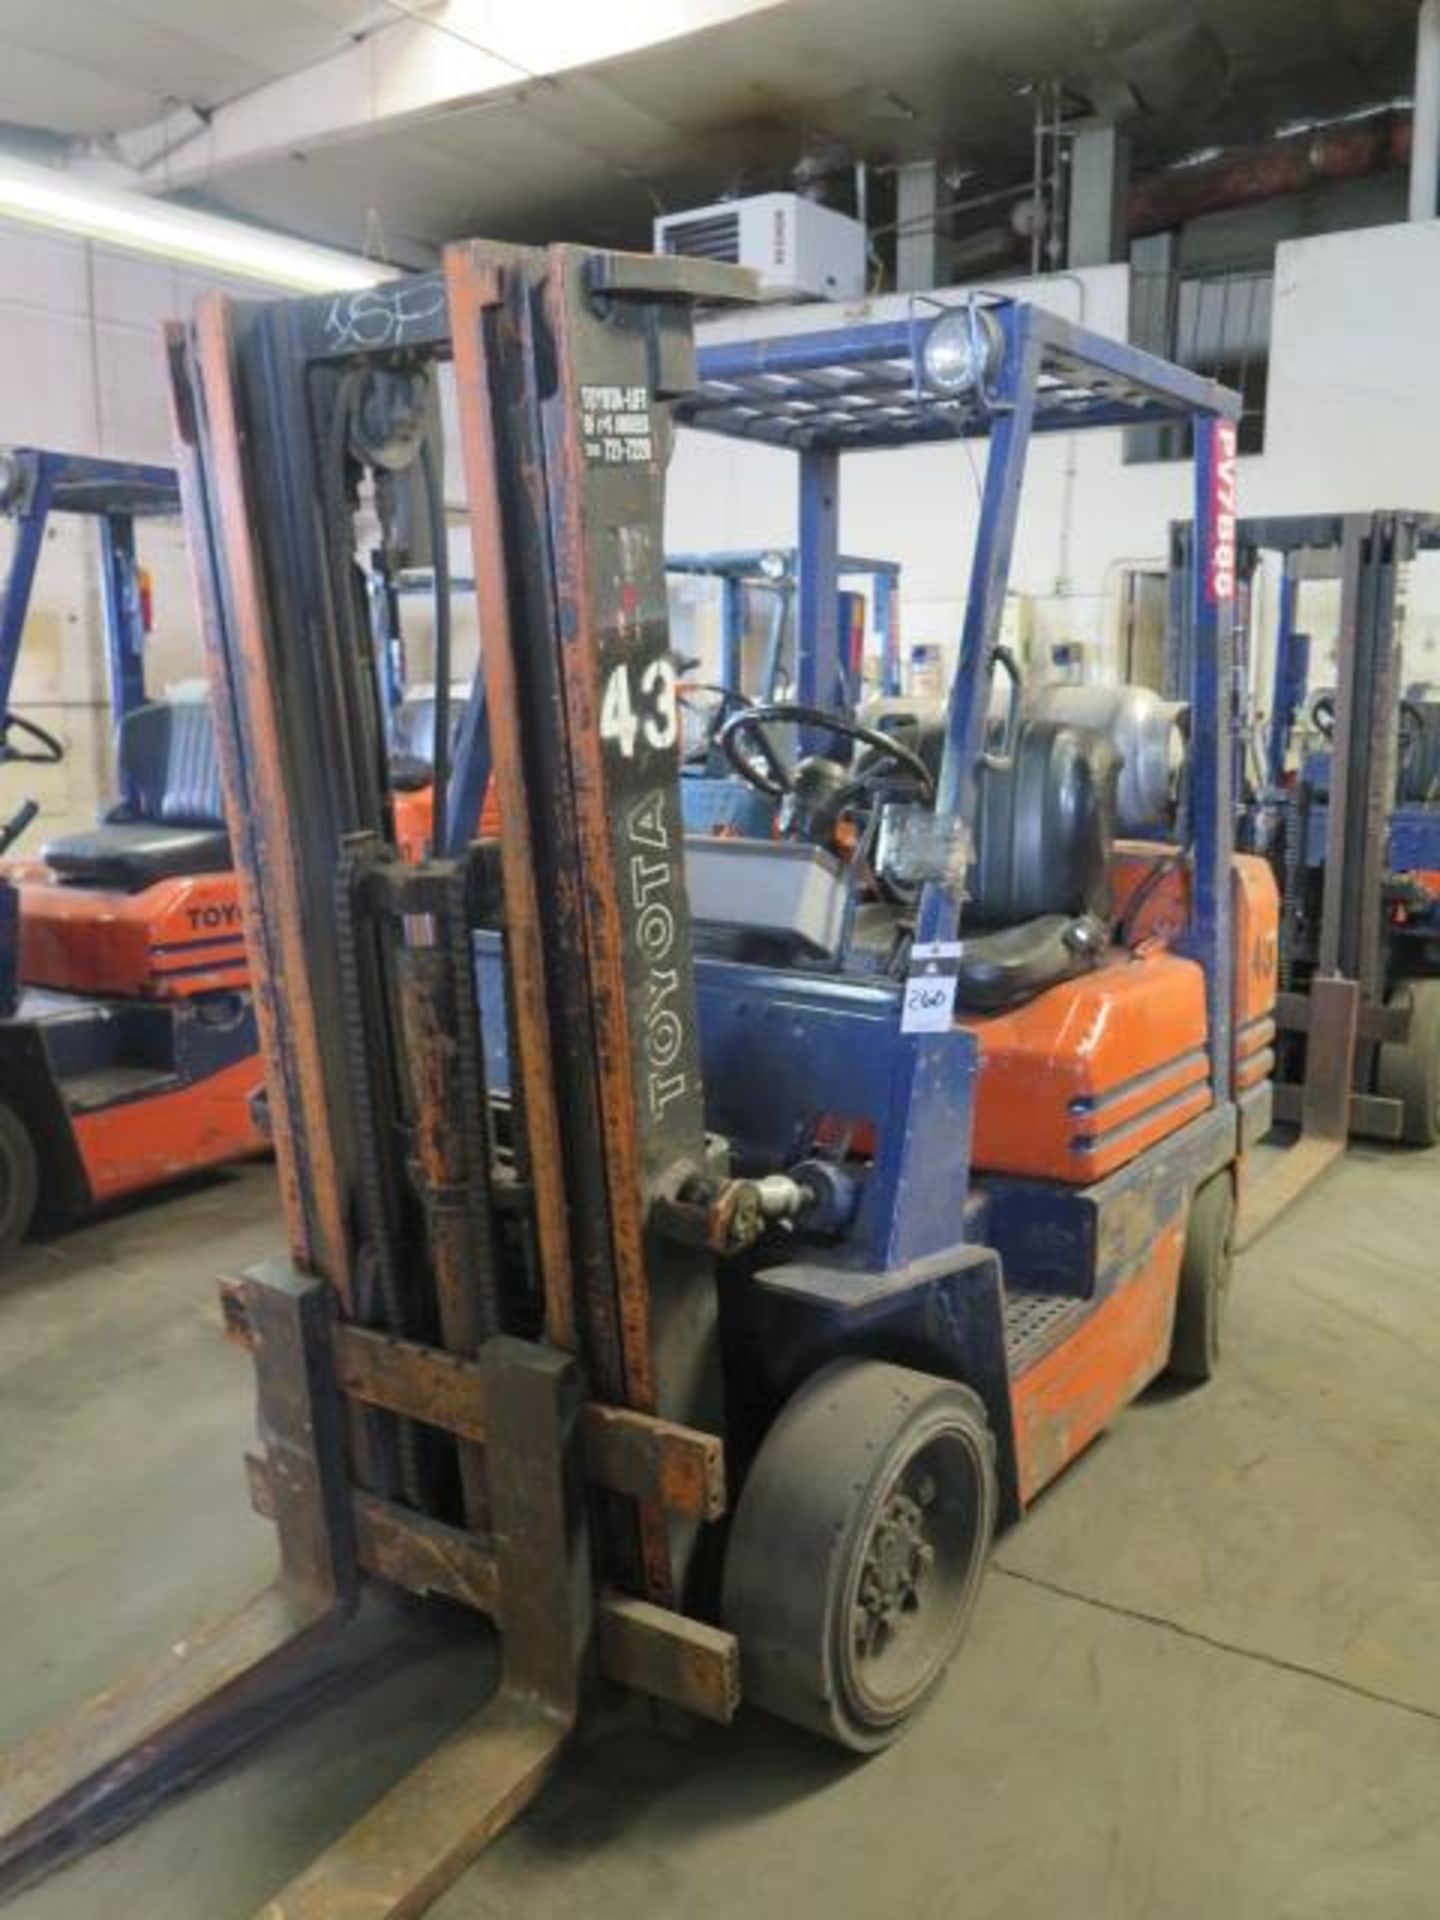 Toyota 5FGC25 5000 Lb Cap LPG Forklift s/n 18534 w/ 3-Stage Mast, 185” Lift Height, Cushion Tires